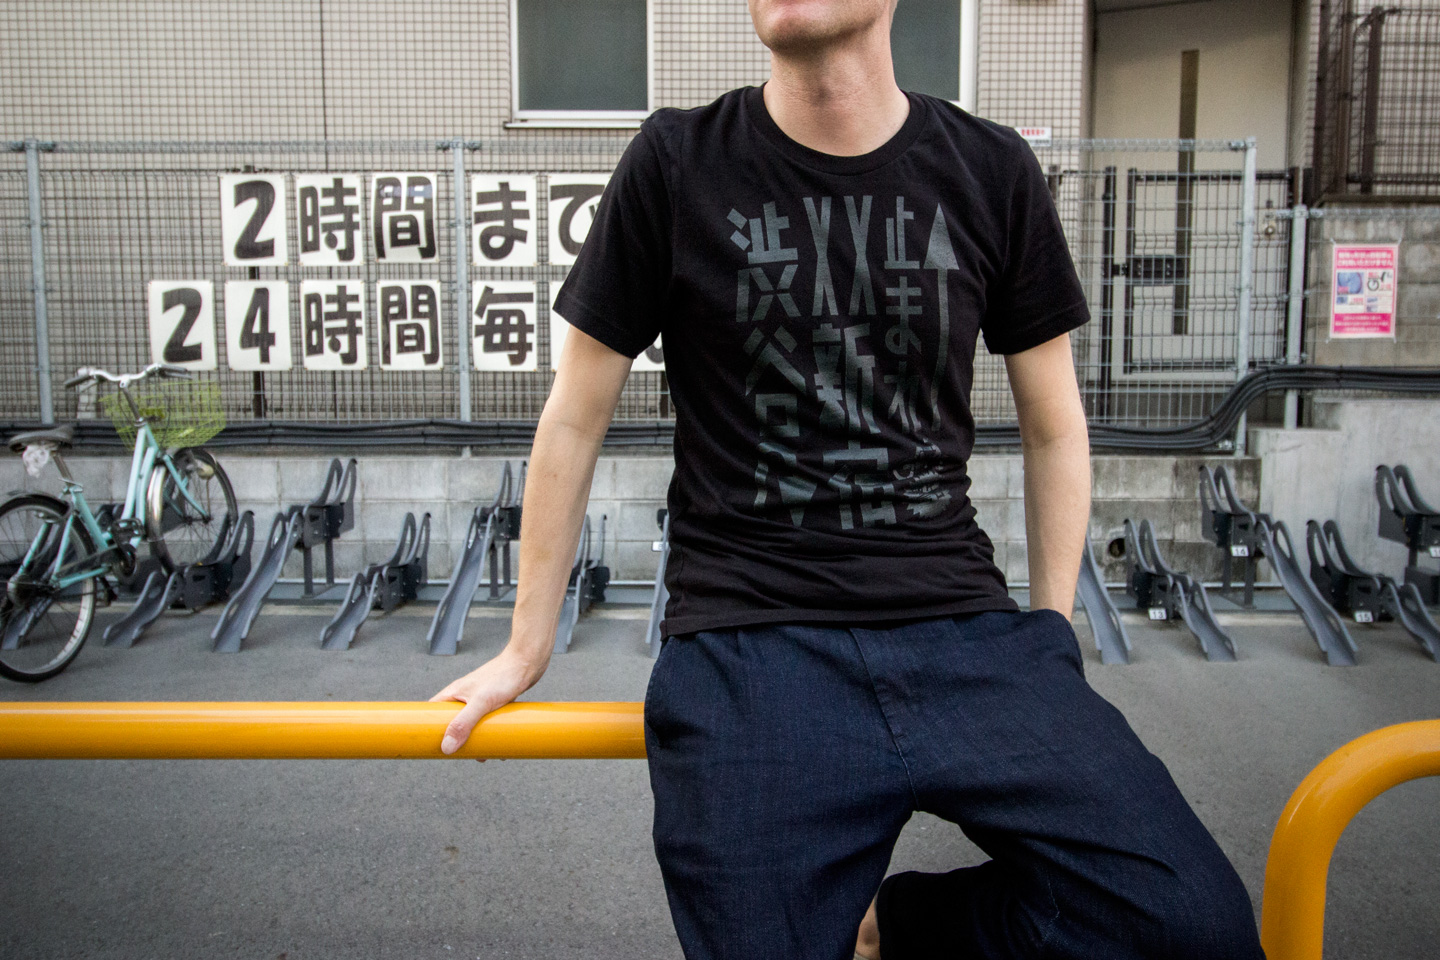 Tokyo Signs™ - Products inspired by the streets of Tokyo - Tokyo Roadmarks T-shirt (Black on Black)